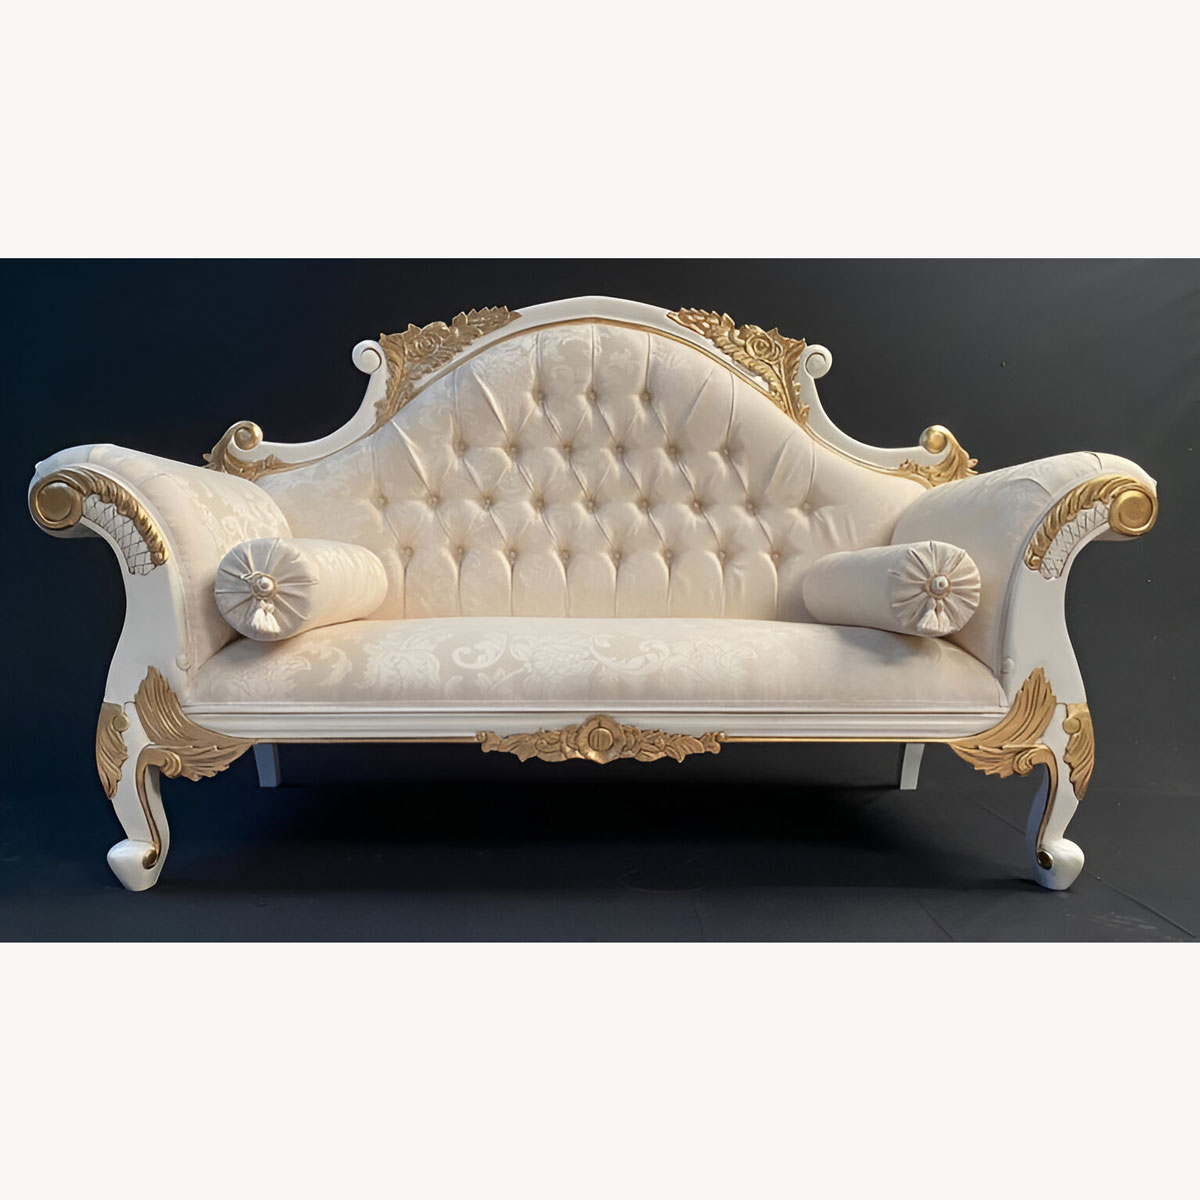 Charles Louis Cuddler Love Seat Wedding Set Gold And White Sofa Plus Two Chairs 1 - Hampshire Barn Interiors - Charles Louis Cuddler Love Seat Wedding Set Gold And White Sofa Plus Two Chairs -